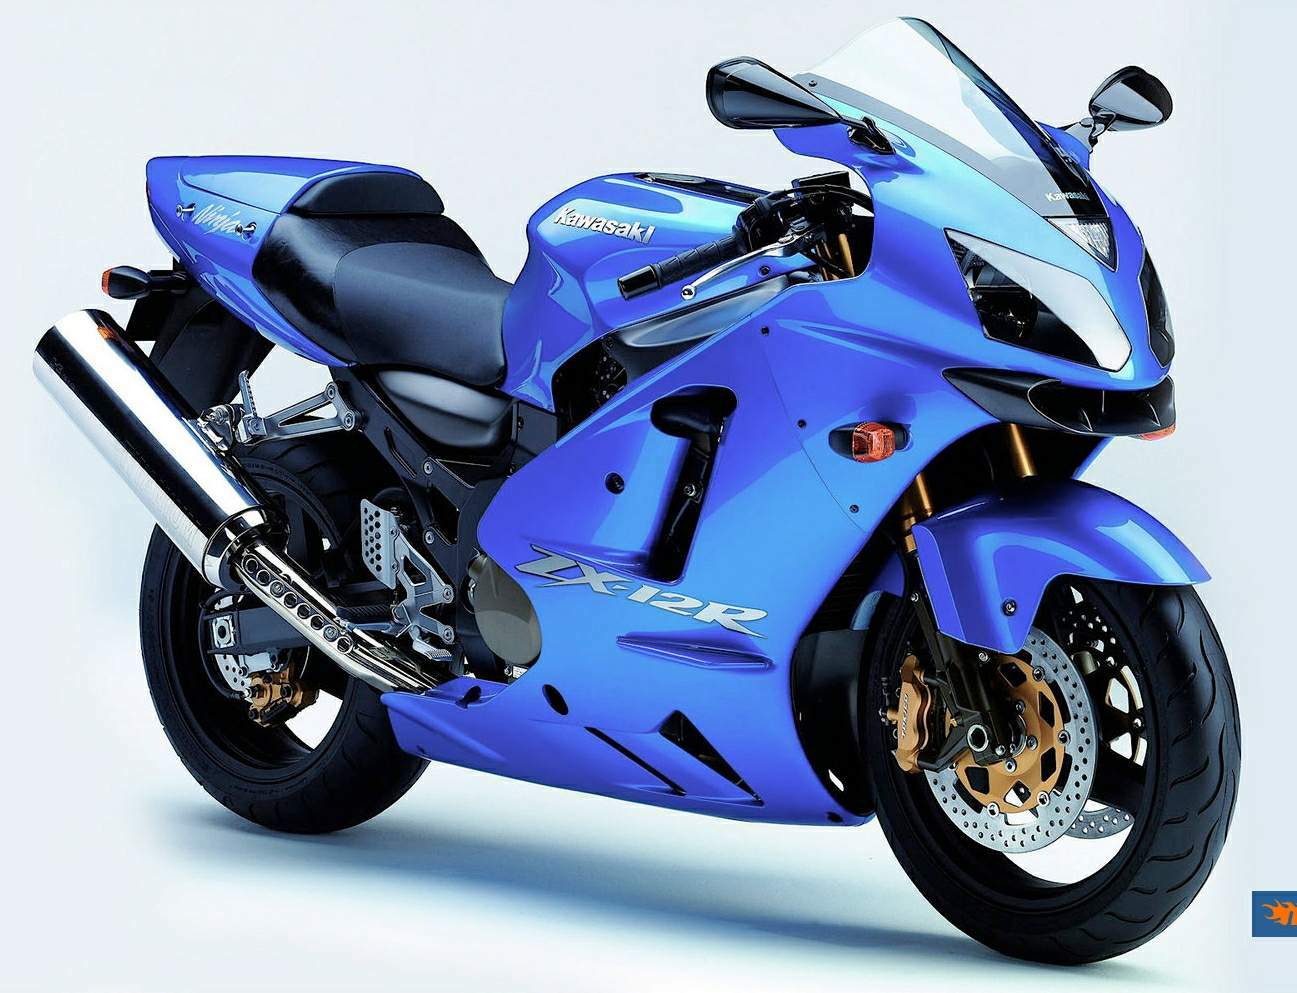 zx-12r 2005 - カワサキ